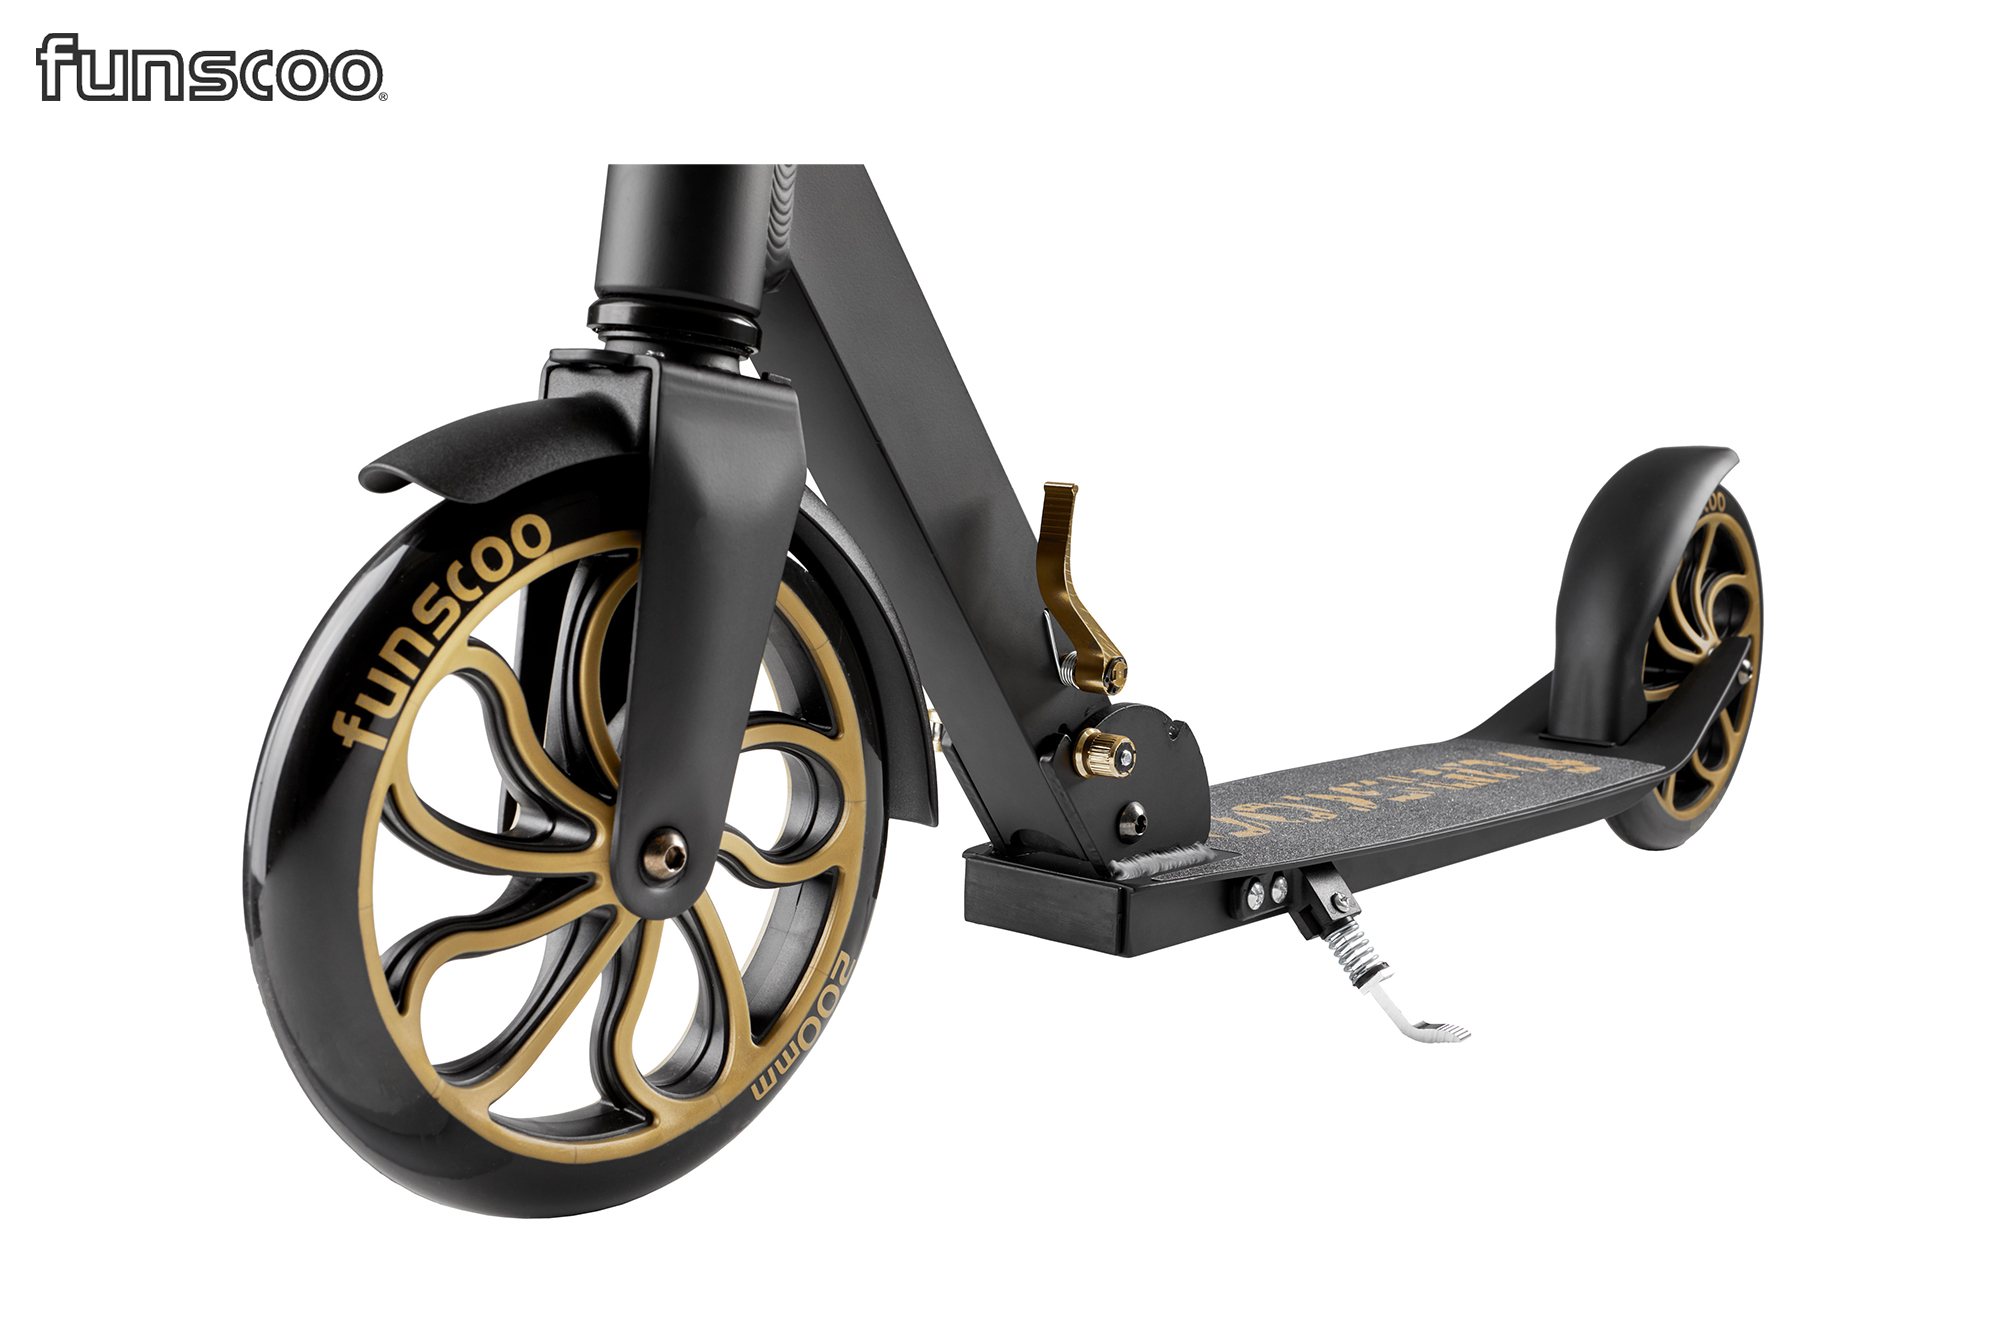 funscoo 200 Scooter - schwarz / gold